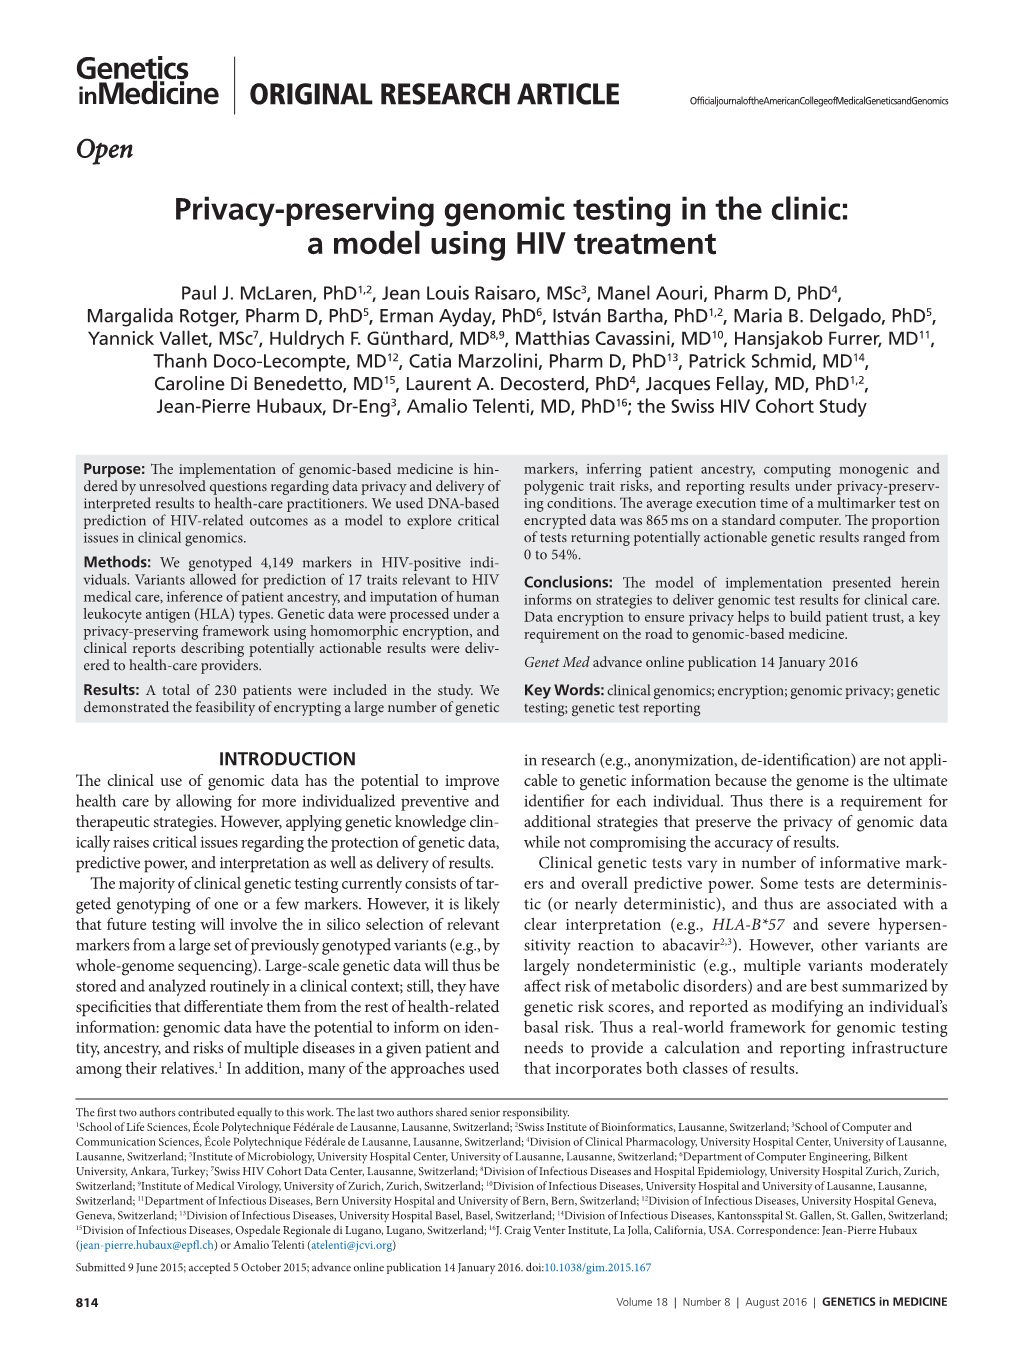 Privacy-Preserving Genomic Testing in the Clinic: a Model Using HIV Treatment